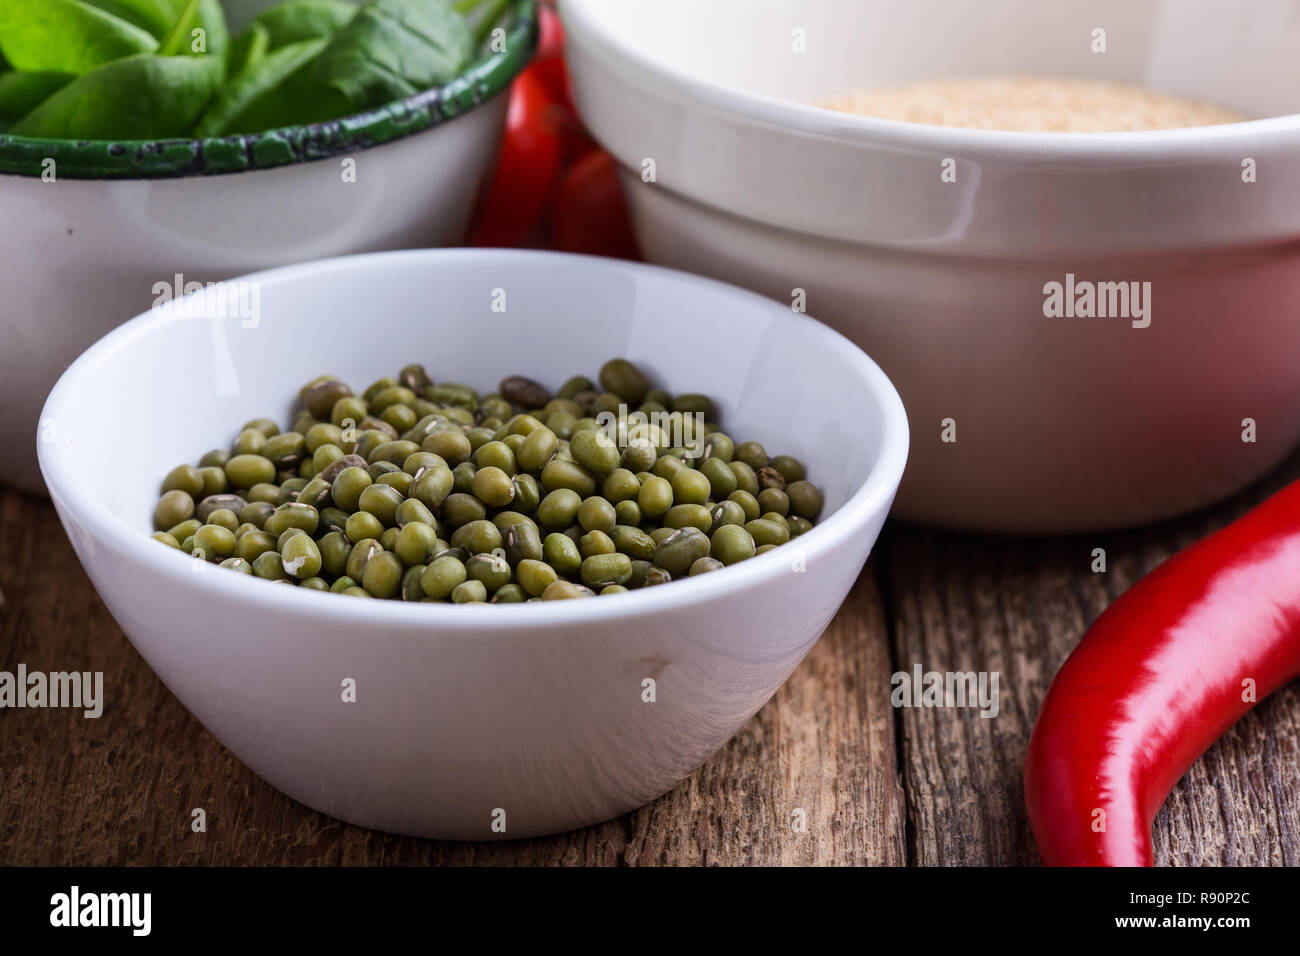 Mung bean. Variety of fresh  vegetables and dry grains and beans. Healthy plant based vegan food, close up, selection focus Stock Photo